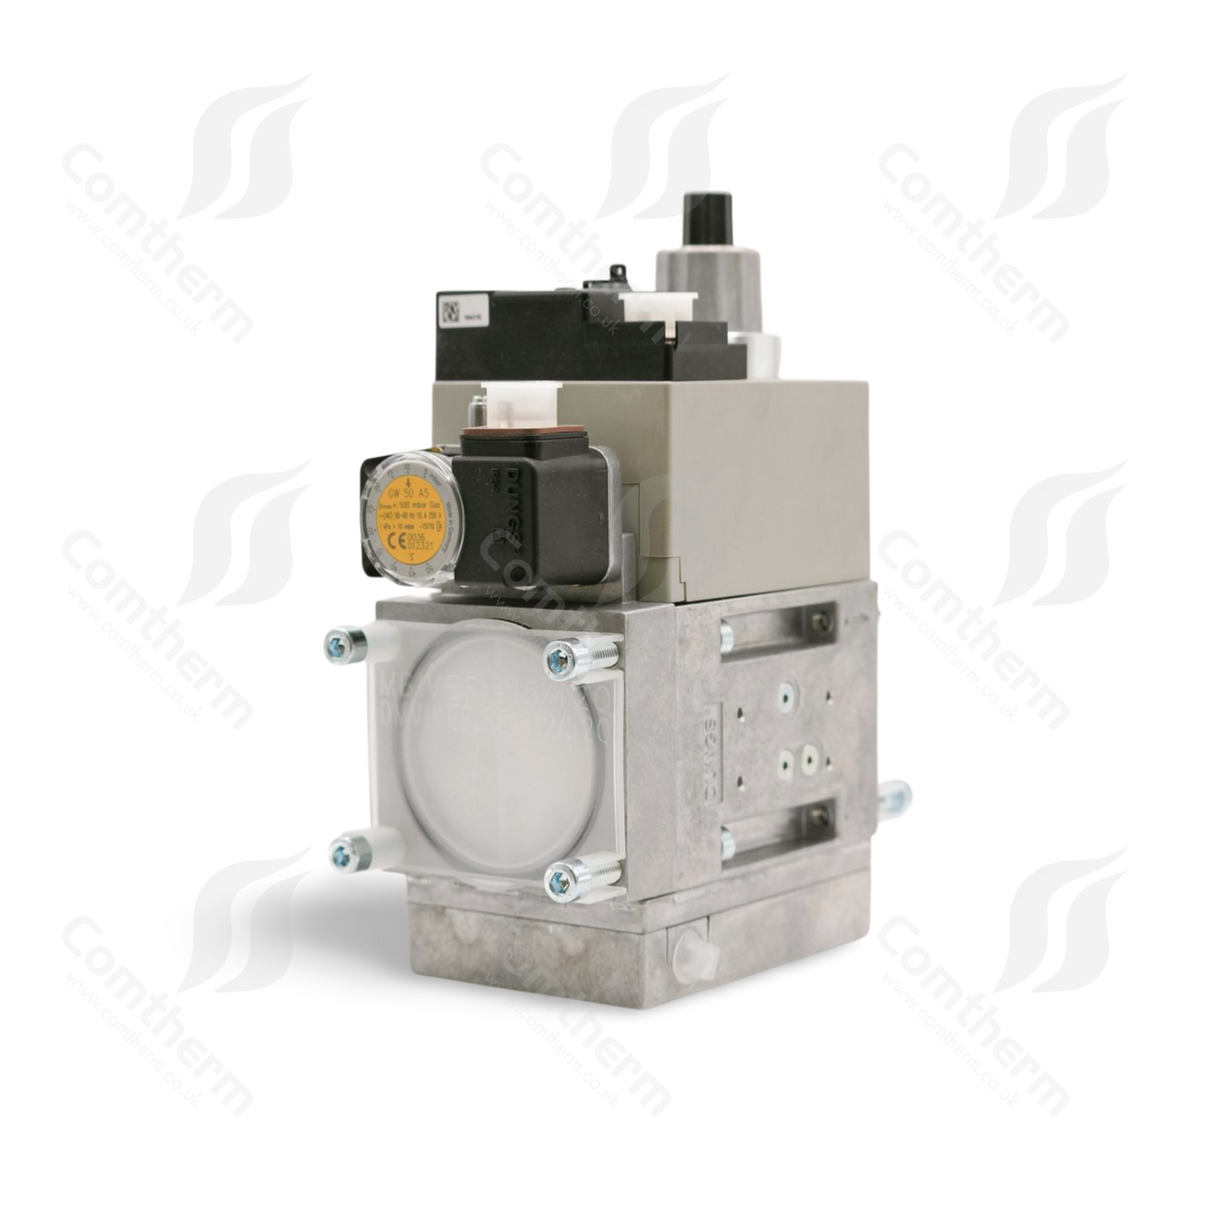 Dungs MB-DLE 415 B01 S20 + GW50A5 Multibloc Gas Valve - 230v